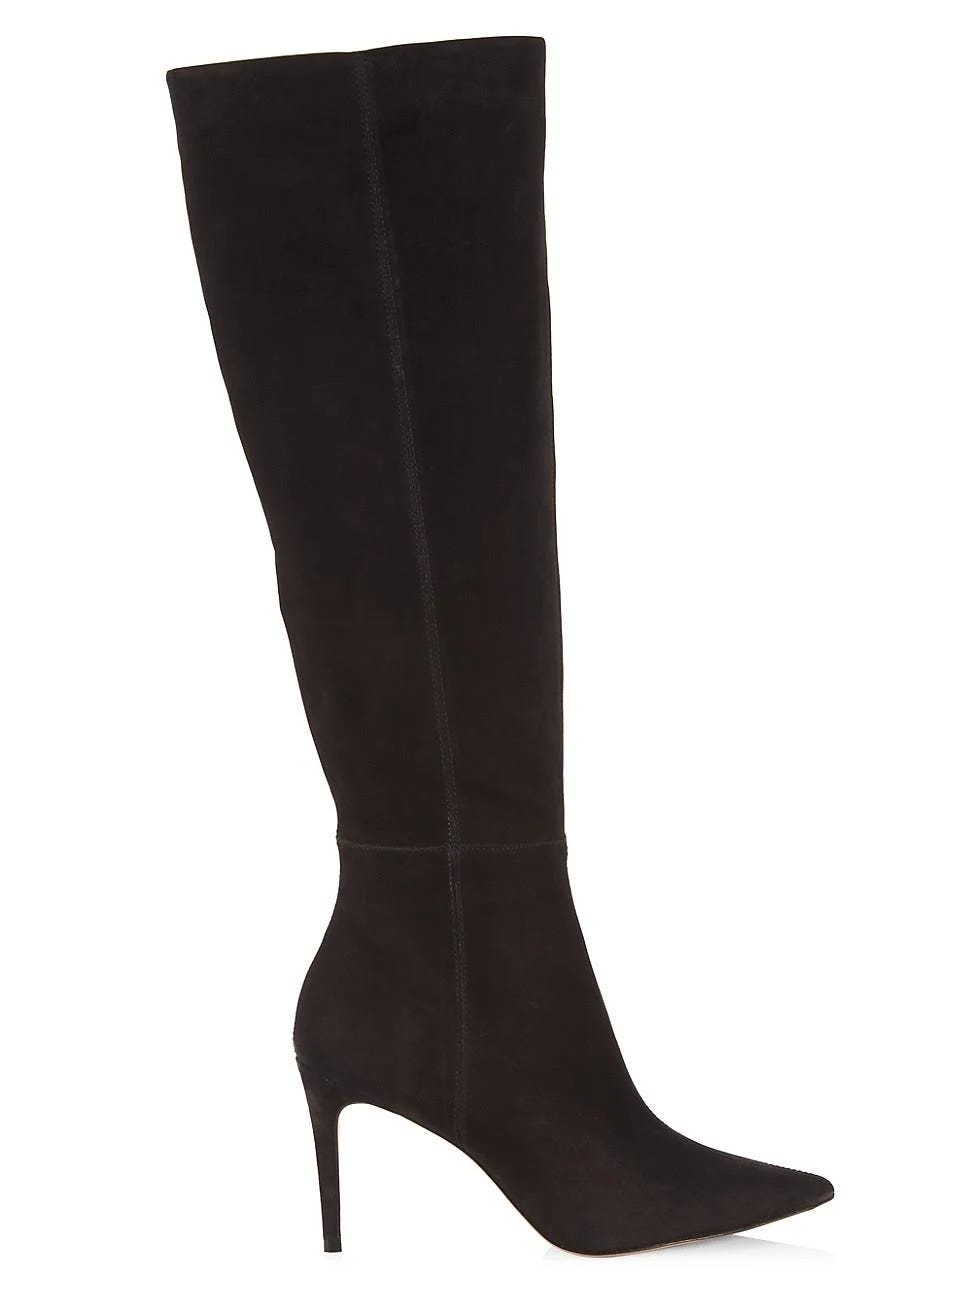 Black Knee-High Suede Stiletto Boots by Saks Fifth Avenue - Size 6.5 | Image